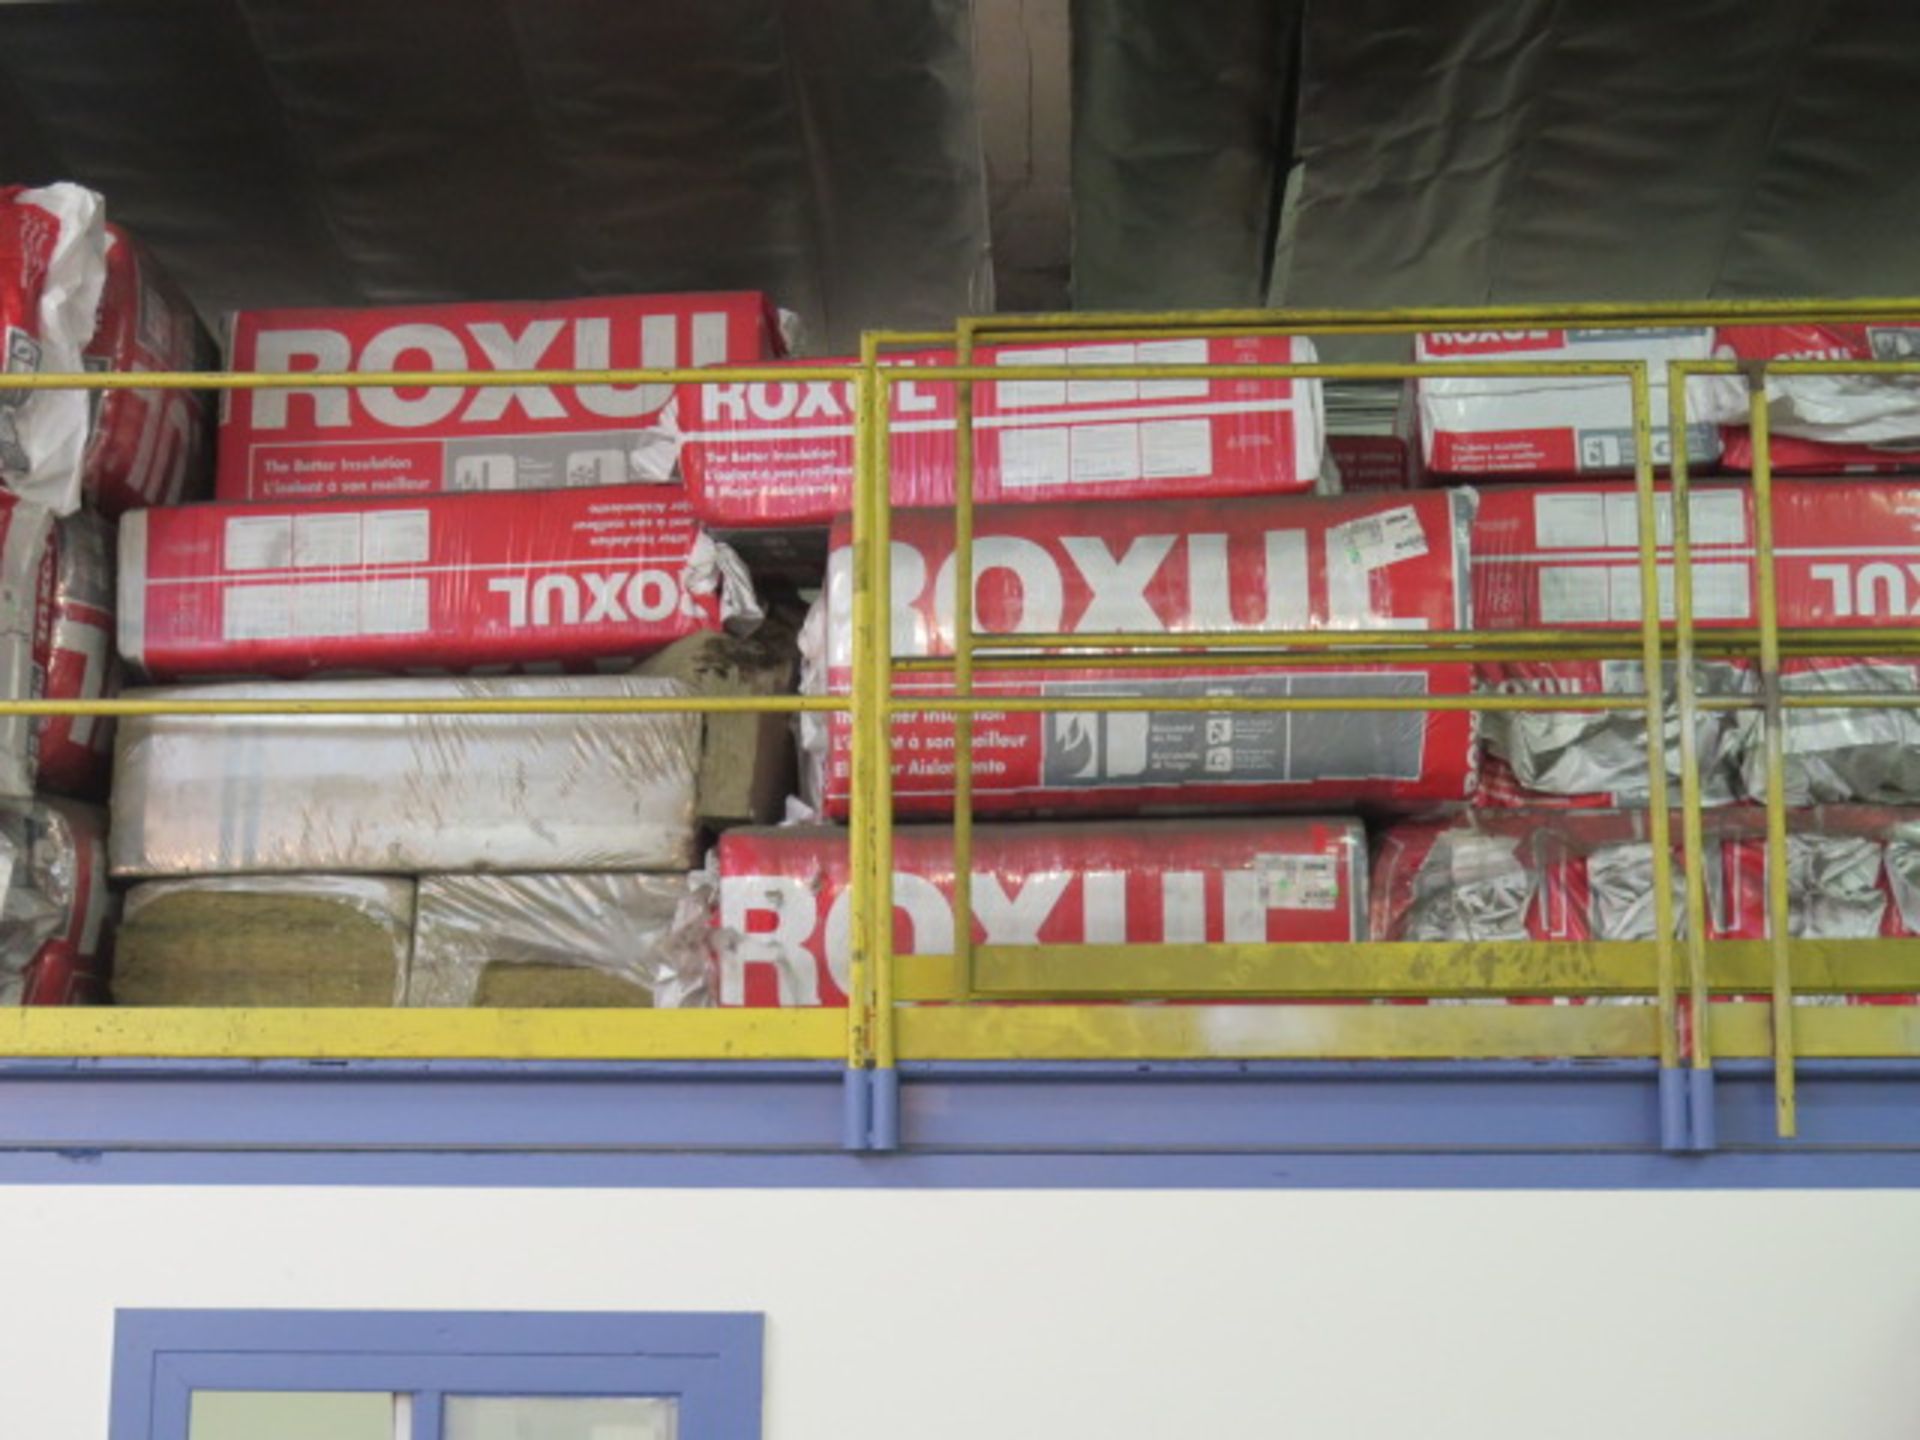 Large Quantity of Roxul “Superwool” SW PLUS, ProRox SL930NA and MOD R High Temperature Insulation. - Image 4 of 23